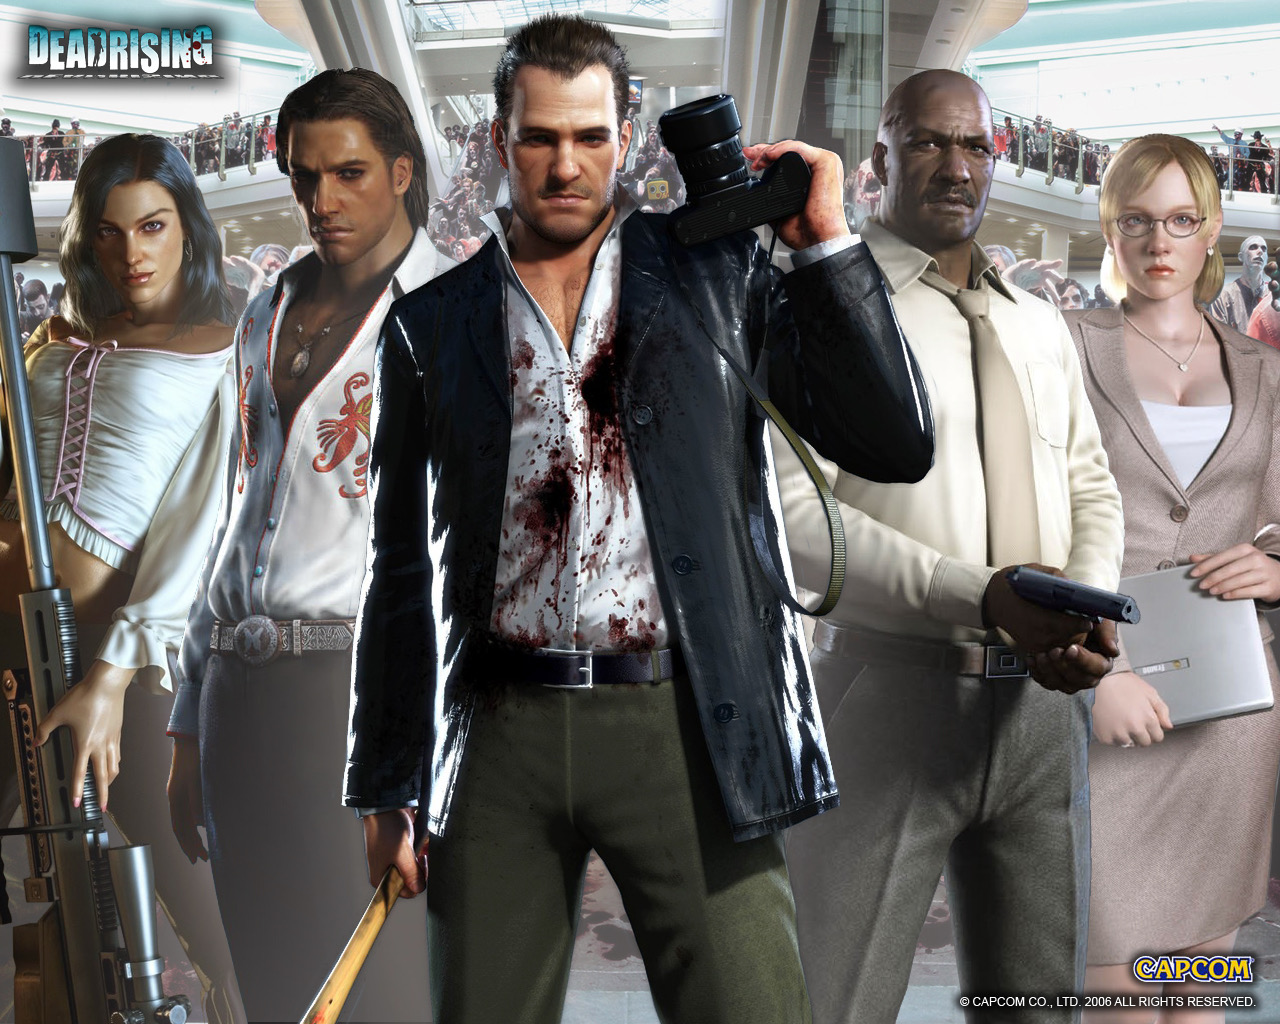 Dead Rising Frank West Video Games Logo Watermarked Video Game Characters Video Game Art Standing Me 1280x1024